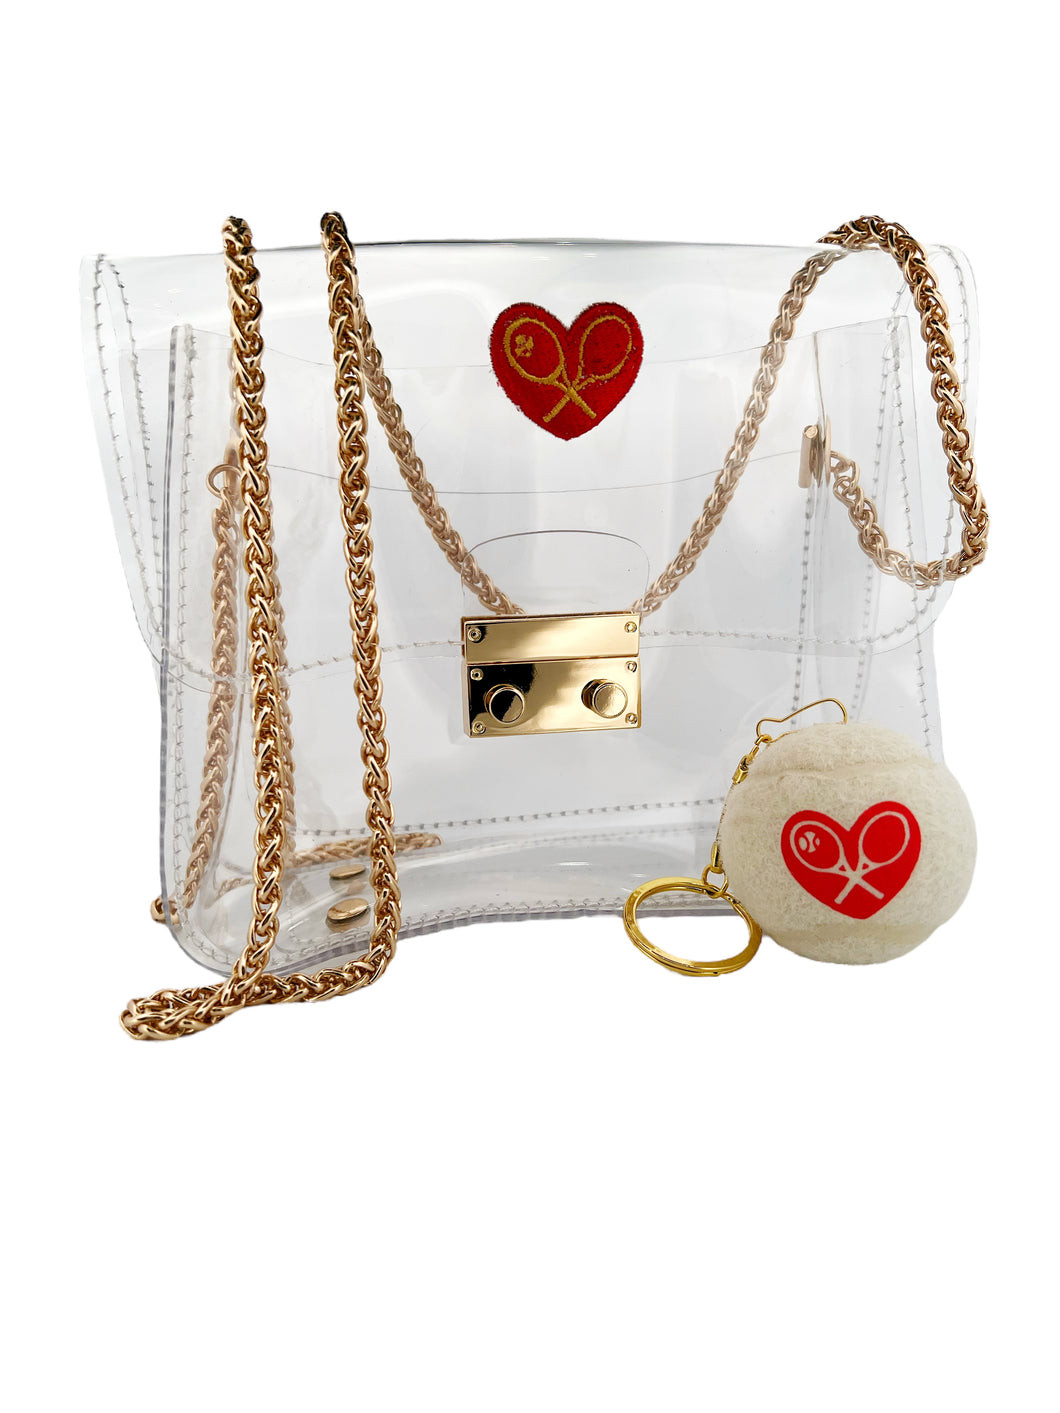 Wide Clear Handbag With Love Heart.  Elegant and lightweight clear handbag. Perfect for going out and it comes with a gift! Choose between a super cute Love Keyring or our elegant net measure.